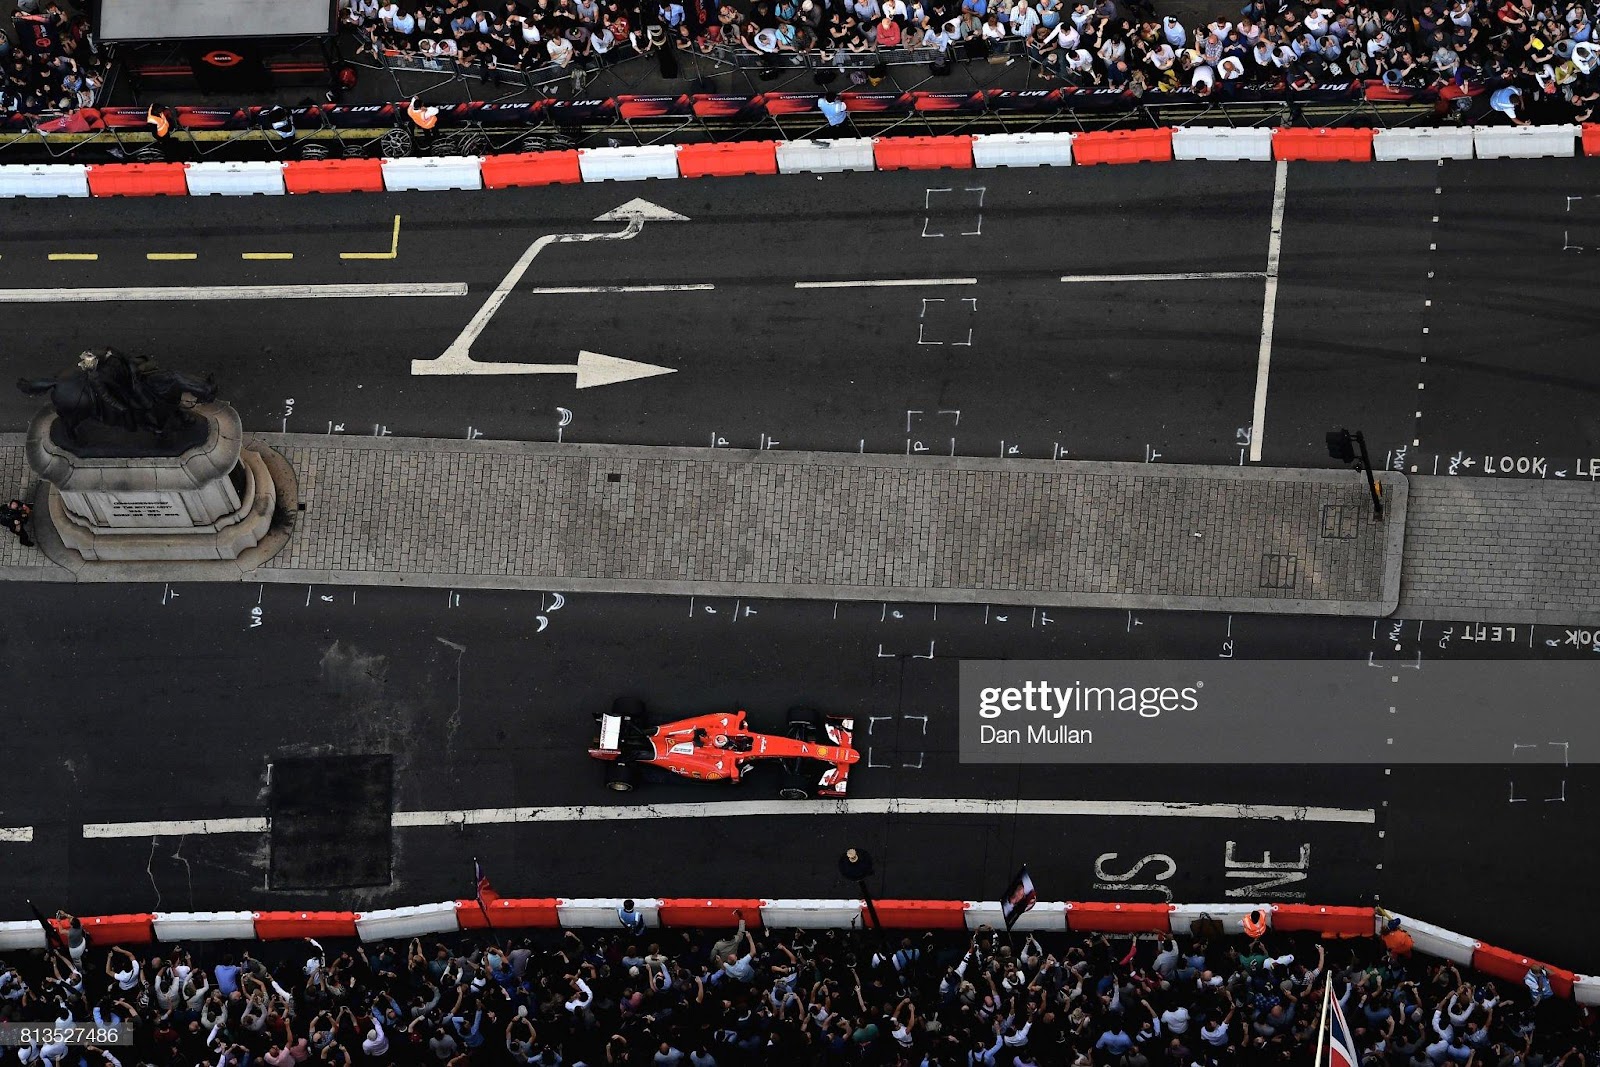 Kimi Raikkonen driving the Ferrari SF15-T during F1 Live London at Trafalgar Square on July 12, 2017 in London, England. F1 Live London, the first time in Formula 1 history that all 10 teams come together outside of a race weekend to put on a show for the public in the heart of London.